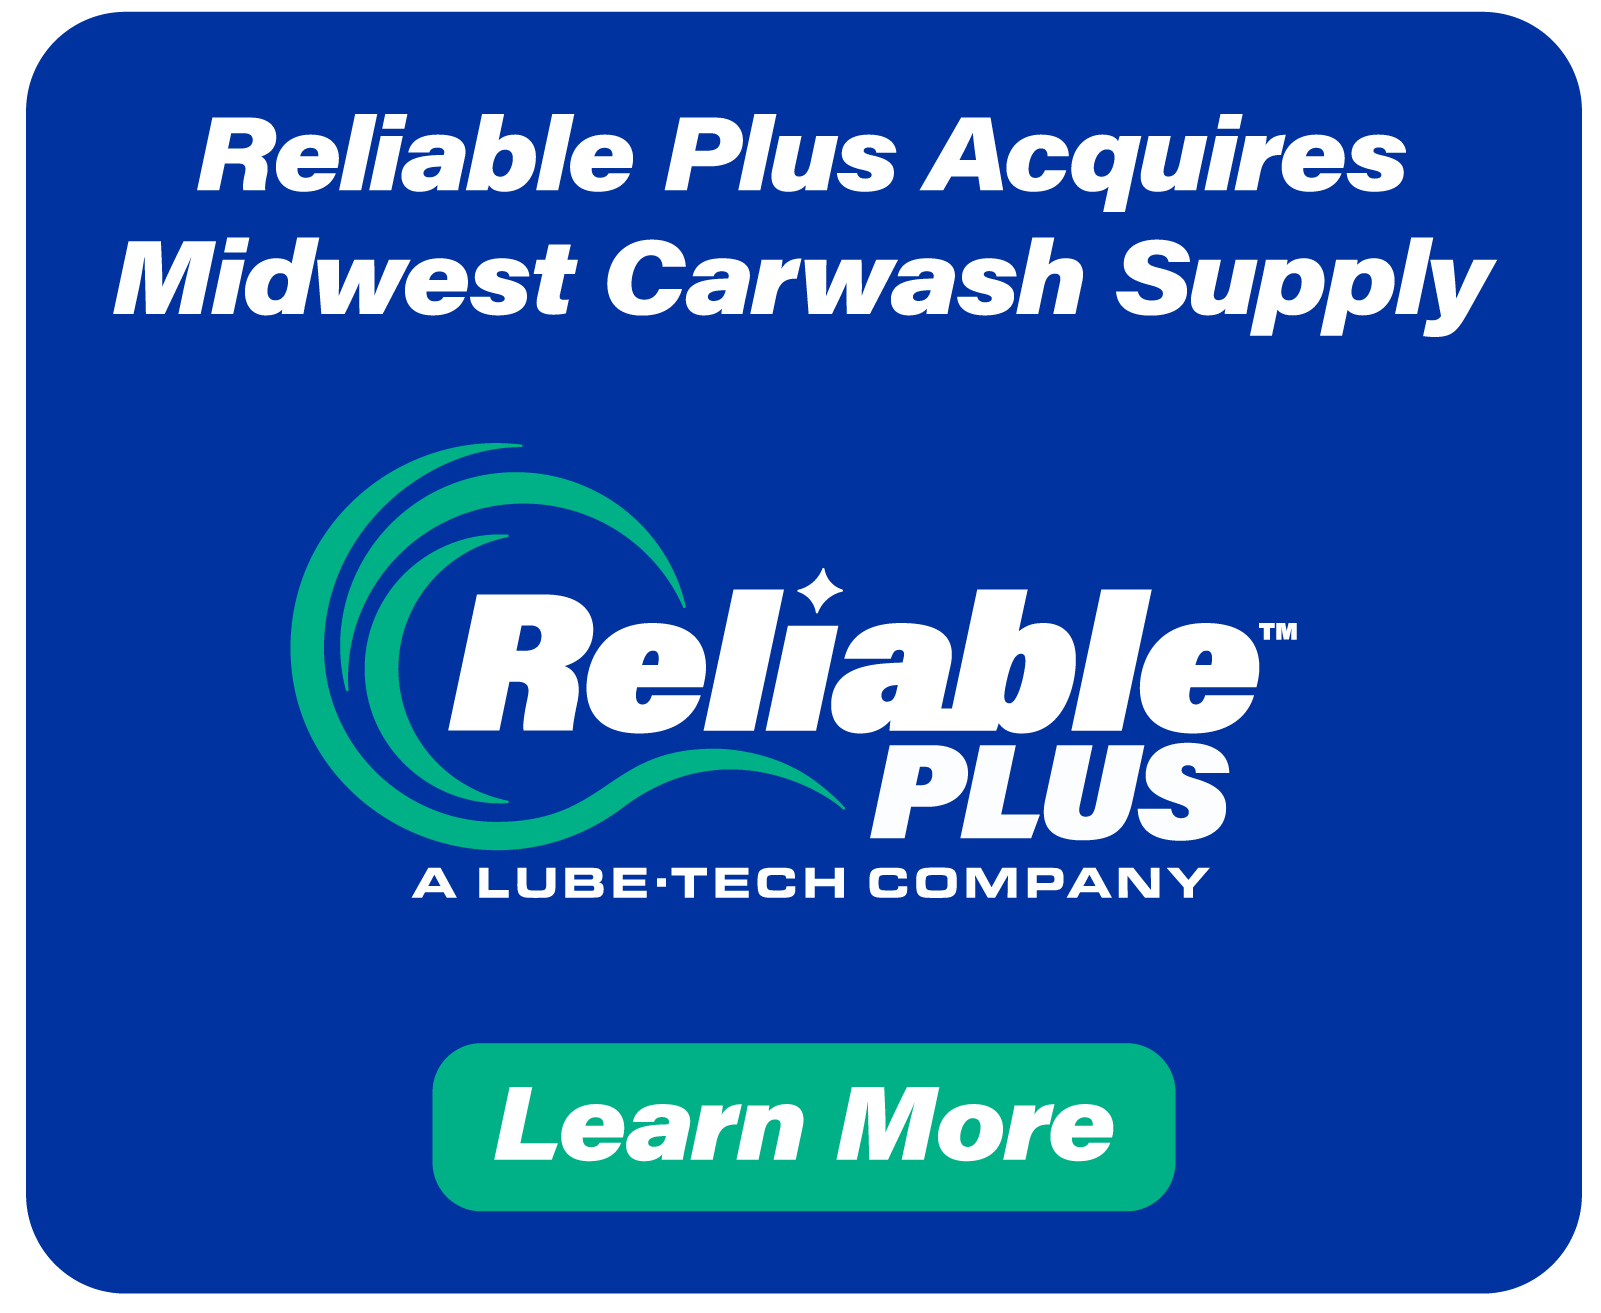 Reliable Plus Acquires Midwest Carwash Supply